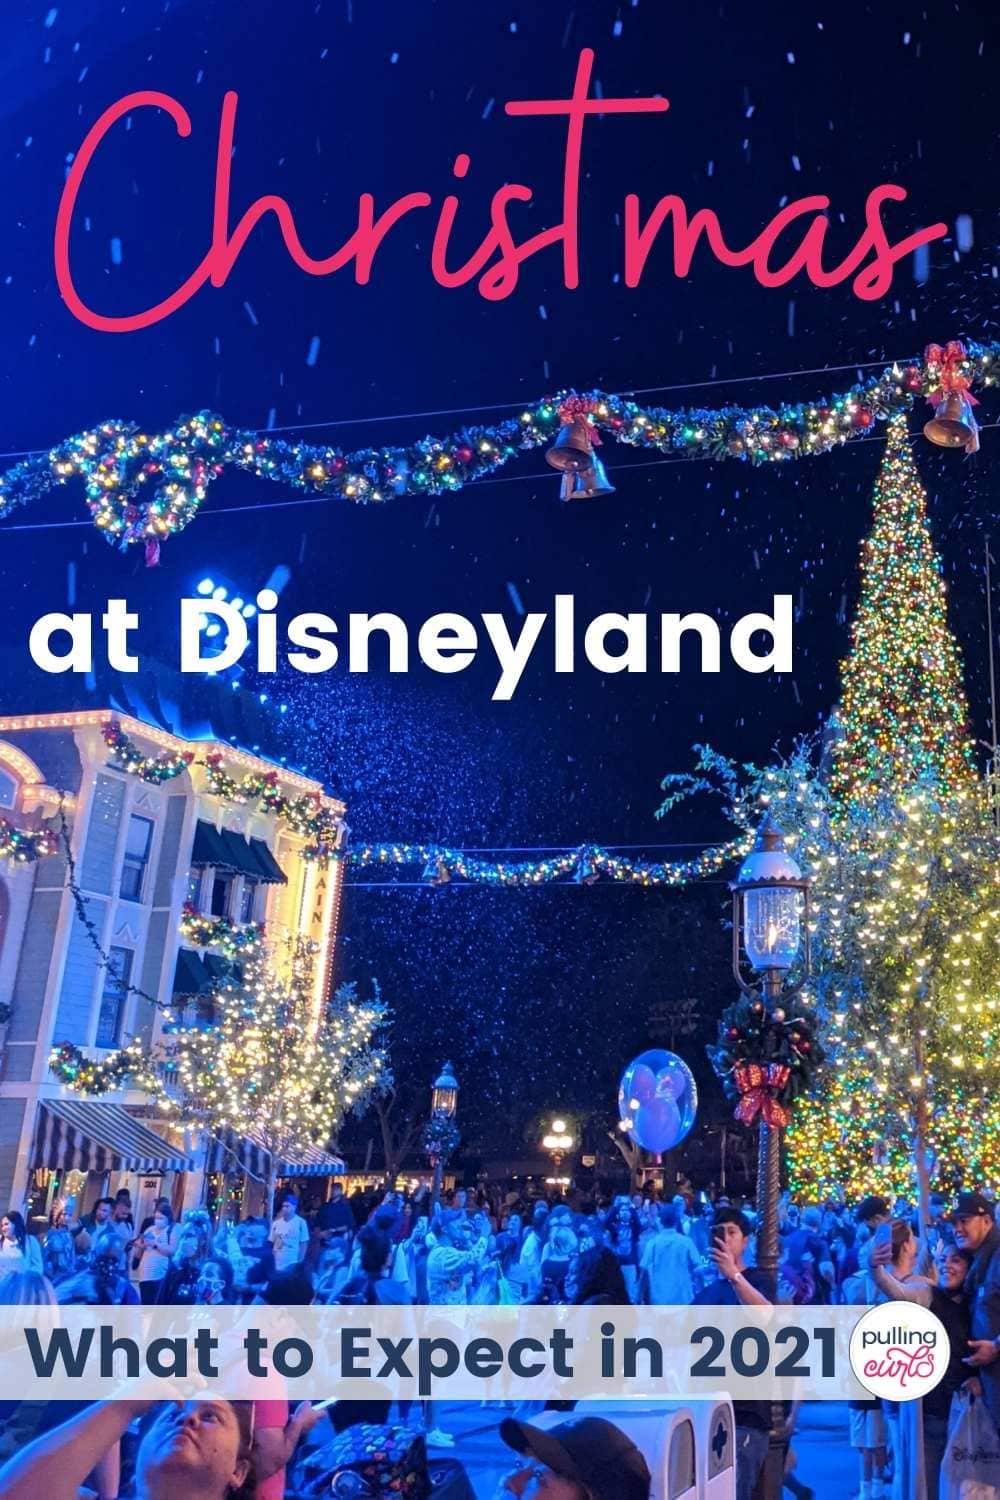 Christmas at Disneyland is amazing!  This page is going to share when it is, tips, where to get the best price on tickets, and what rides change.  It was honestly, one of our family's best memories. #Christmas #Disneyland #DisneylandChristmas #disney #Familytravel #Travel #disneytrip #disneytips #DisneyChristmas via @pullingcurls